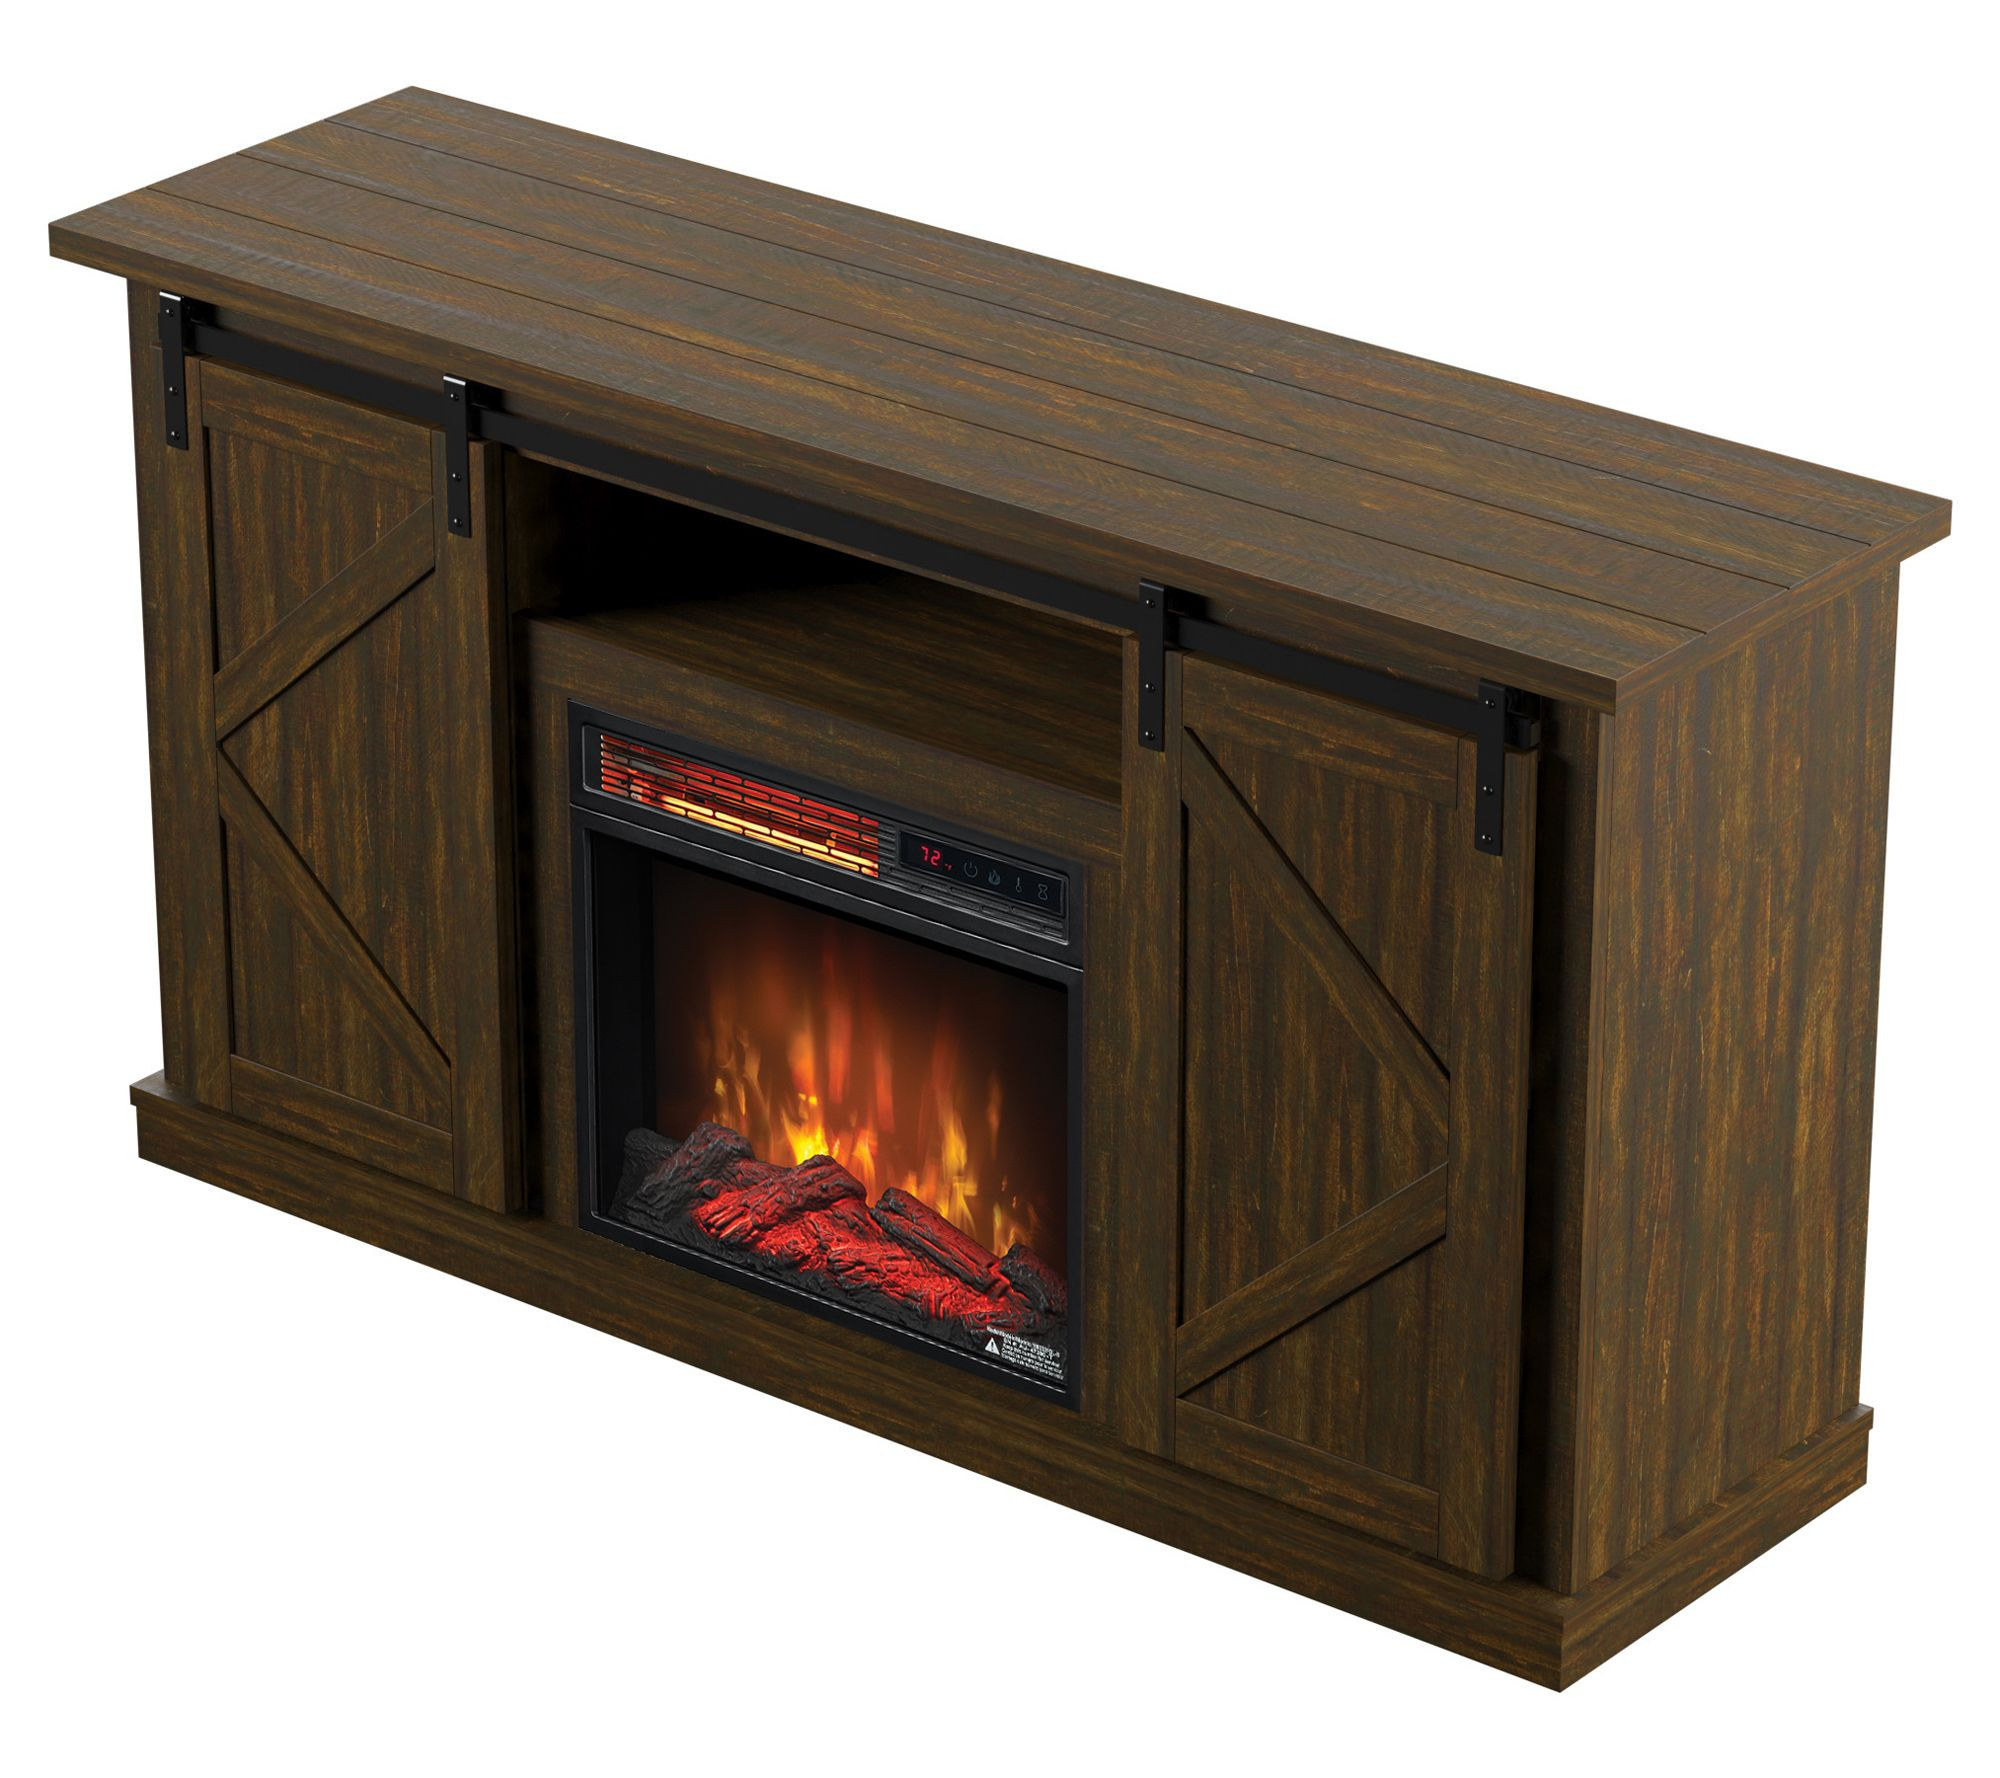 Duraflame Electric Fireplace Tv Stand
 Duraflame 54" TV Stand with Electric Fireplace and Barn